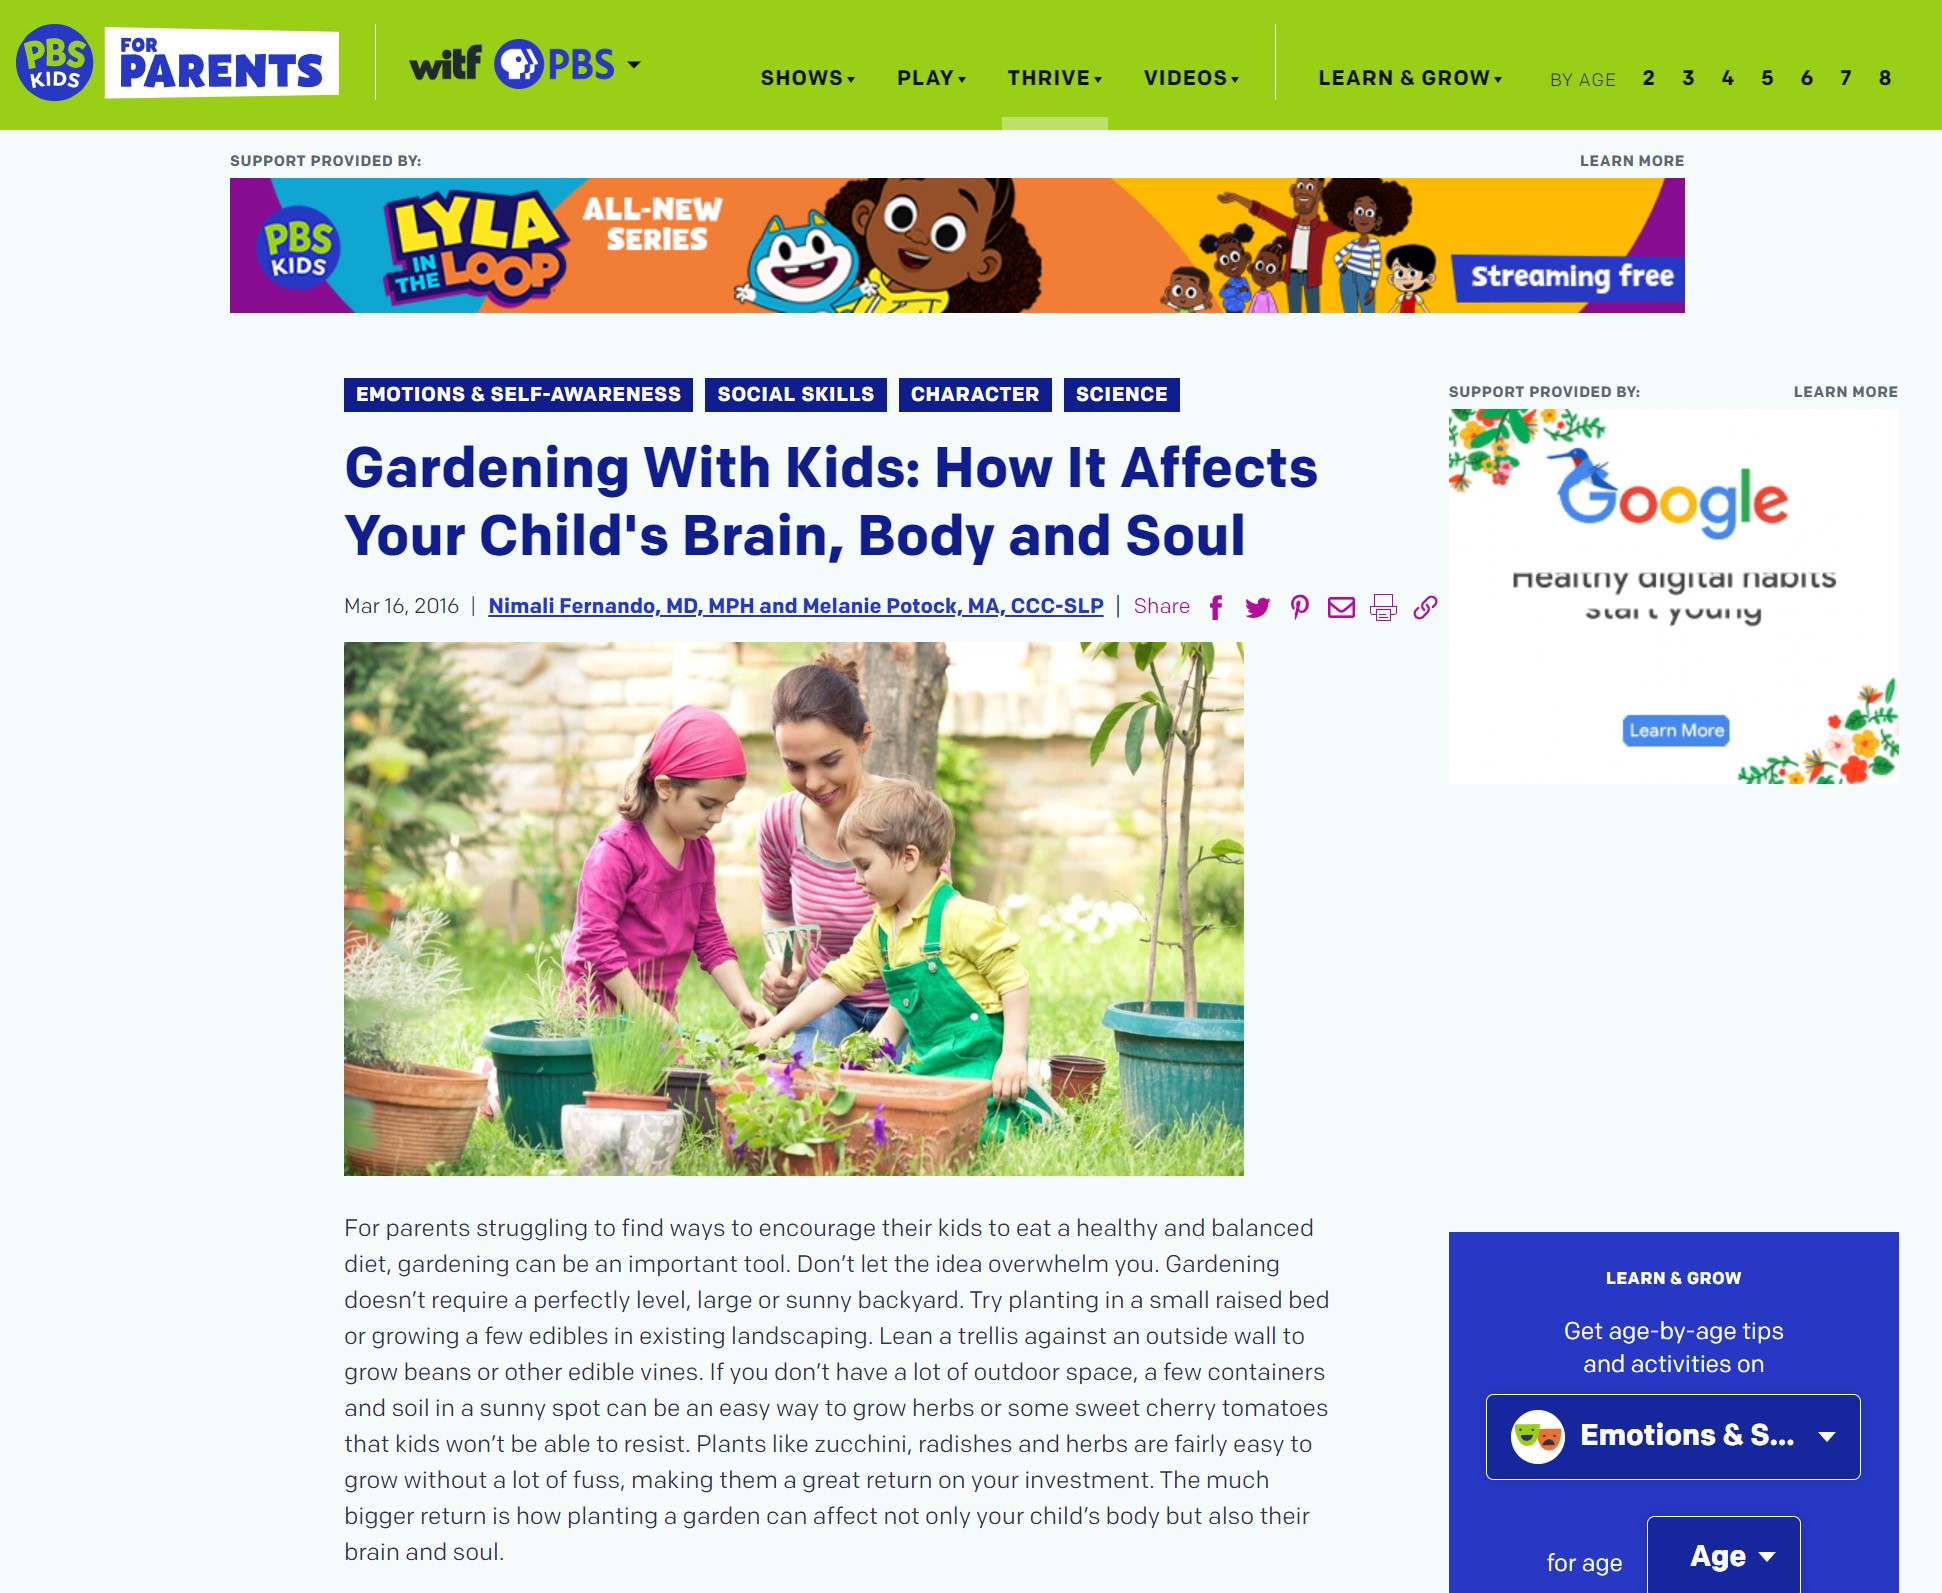 Gardening With Kids: How It Affects Your Child's Brain, Body and Soul